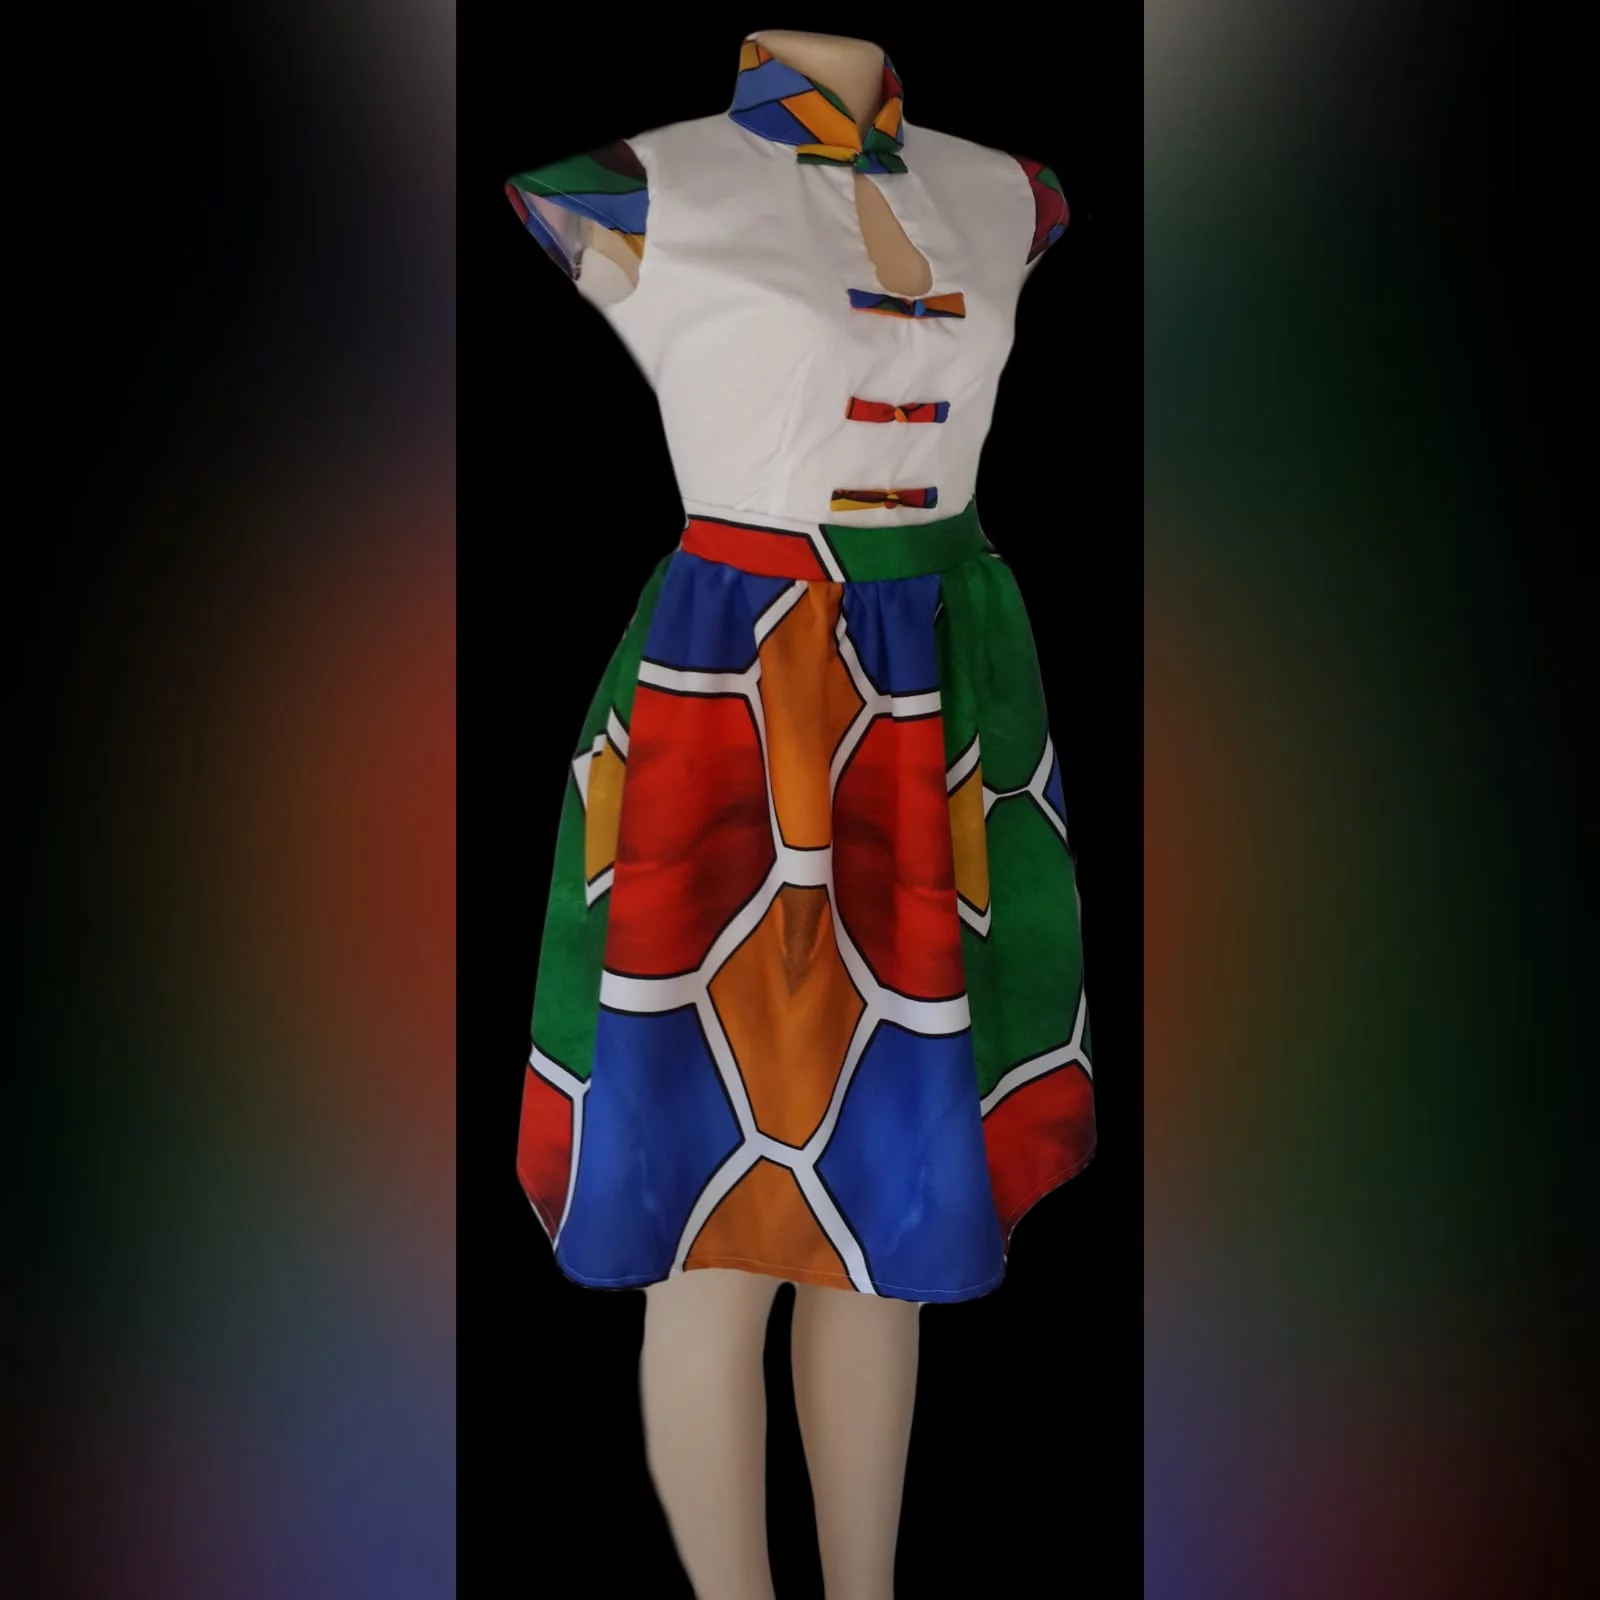 Ndebele dress with white bodice and ndebele print detail 1 traditional ndebele dress, white bodice, chinese collar, cap sleeves and button detail in ndebele print. Bottom of dress in full ndebele print.